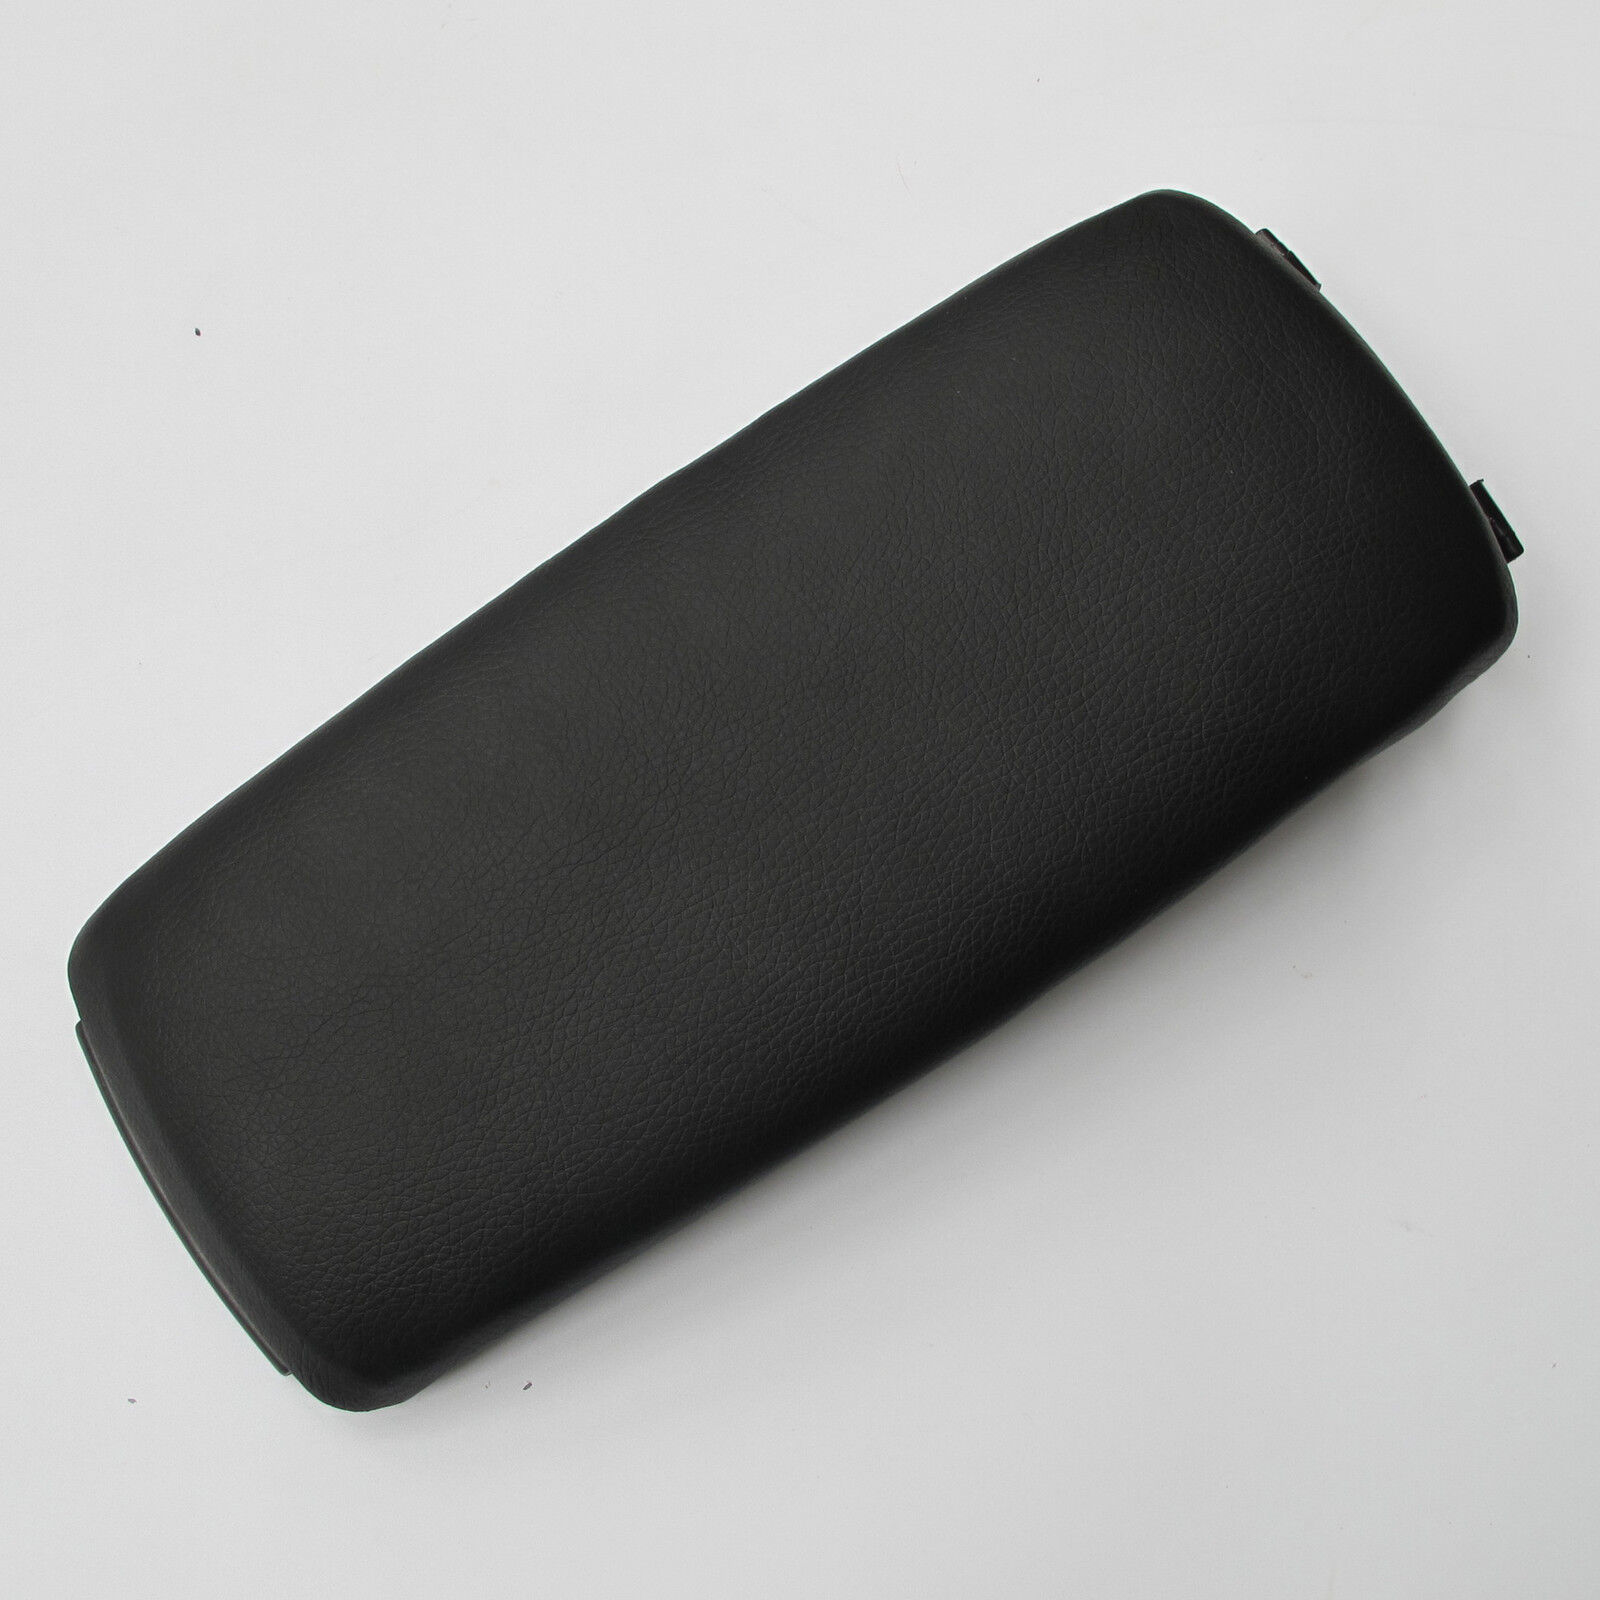 BLACK Armrest Console Box Lid Cover FOR Audi A4 B6 S4 A6 C5 Leather